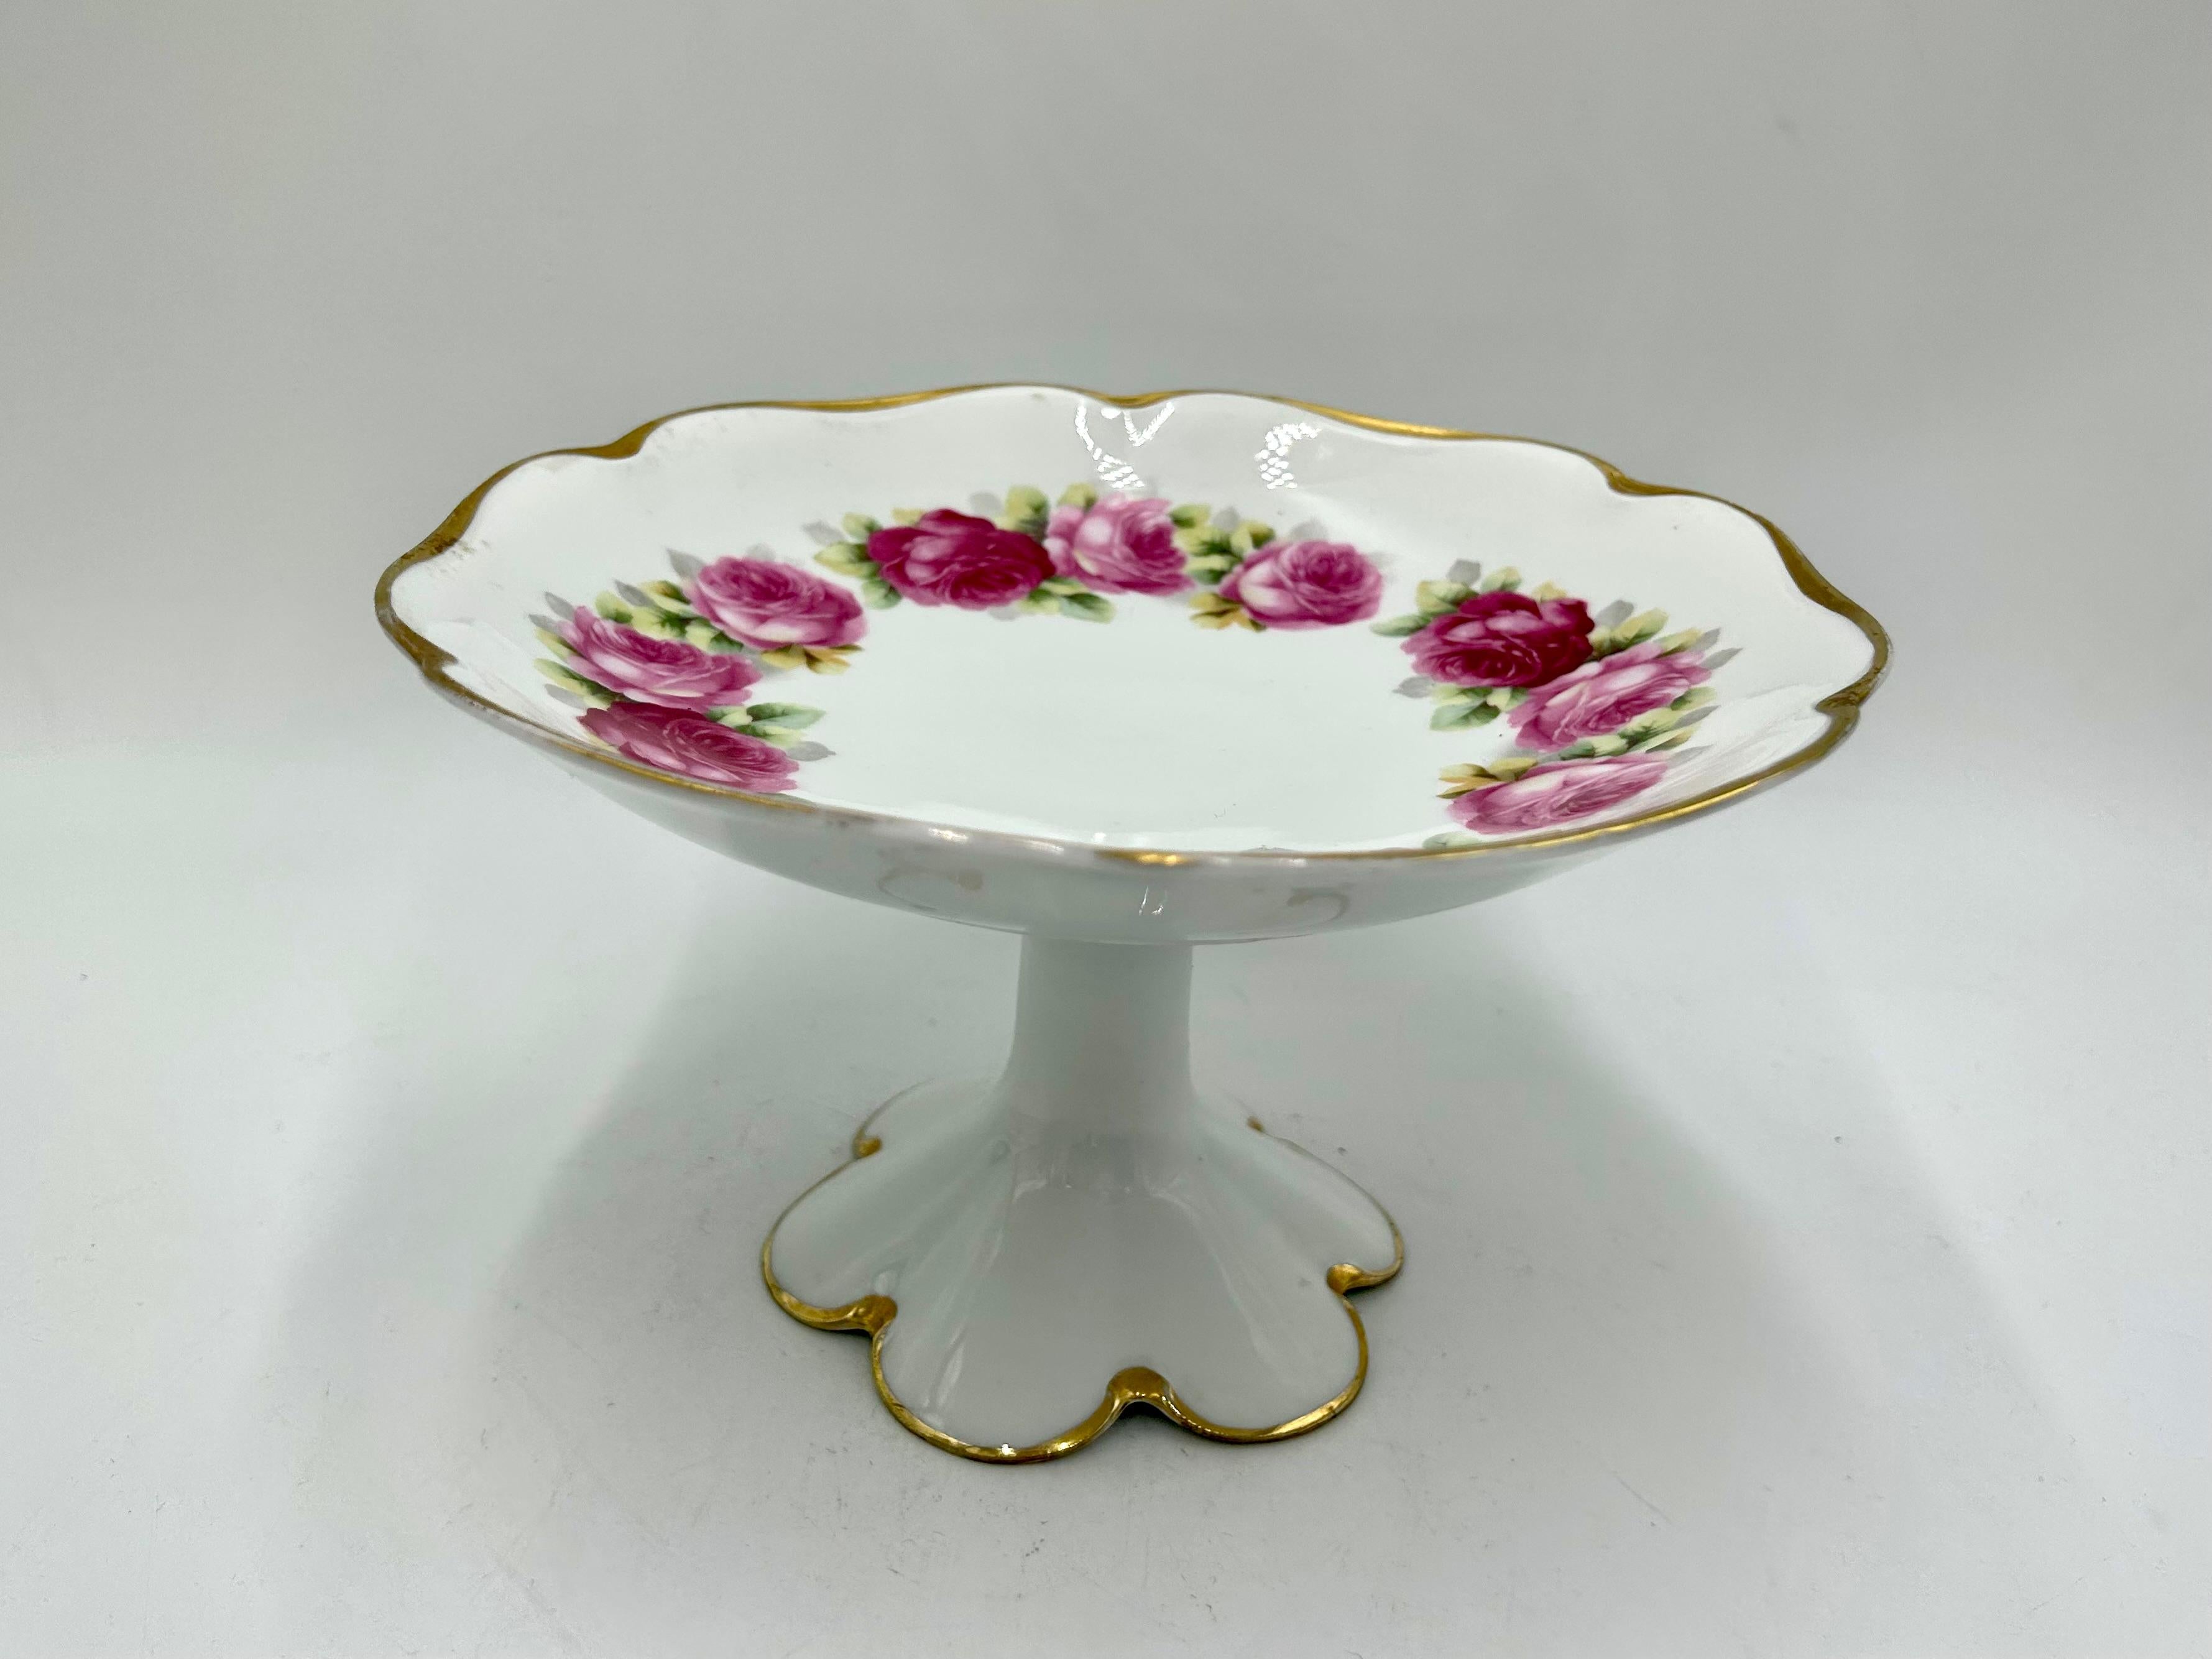 A beautiful platter on a leg from the Chrysantheme Cacilie collection of the excellent Rosenthal manufacturer

White porcelain decorated with a motif of pink flowers and gilding.

Signed with the mark of the factory used in the years